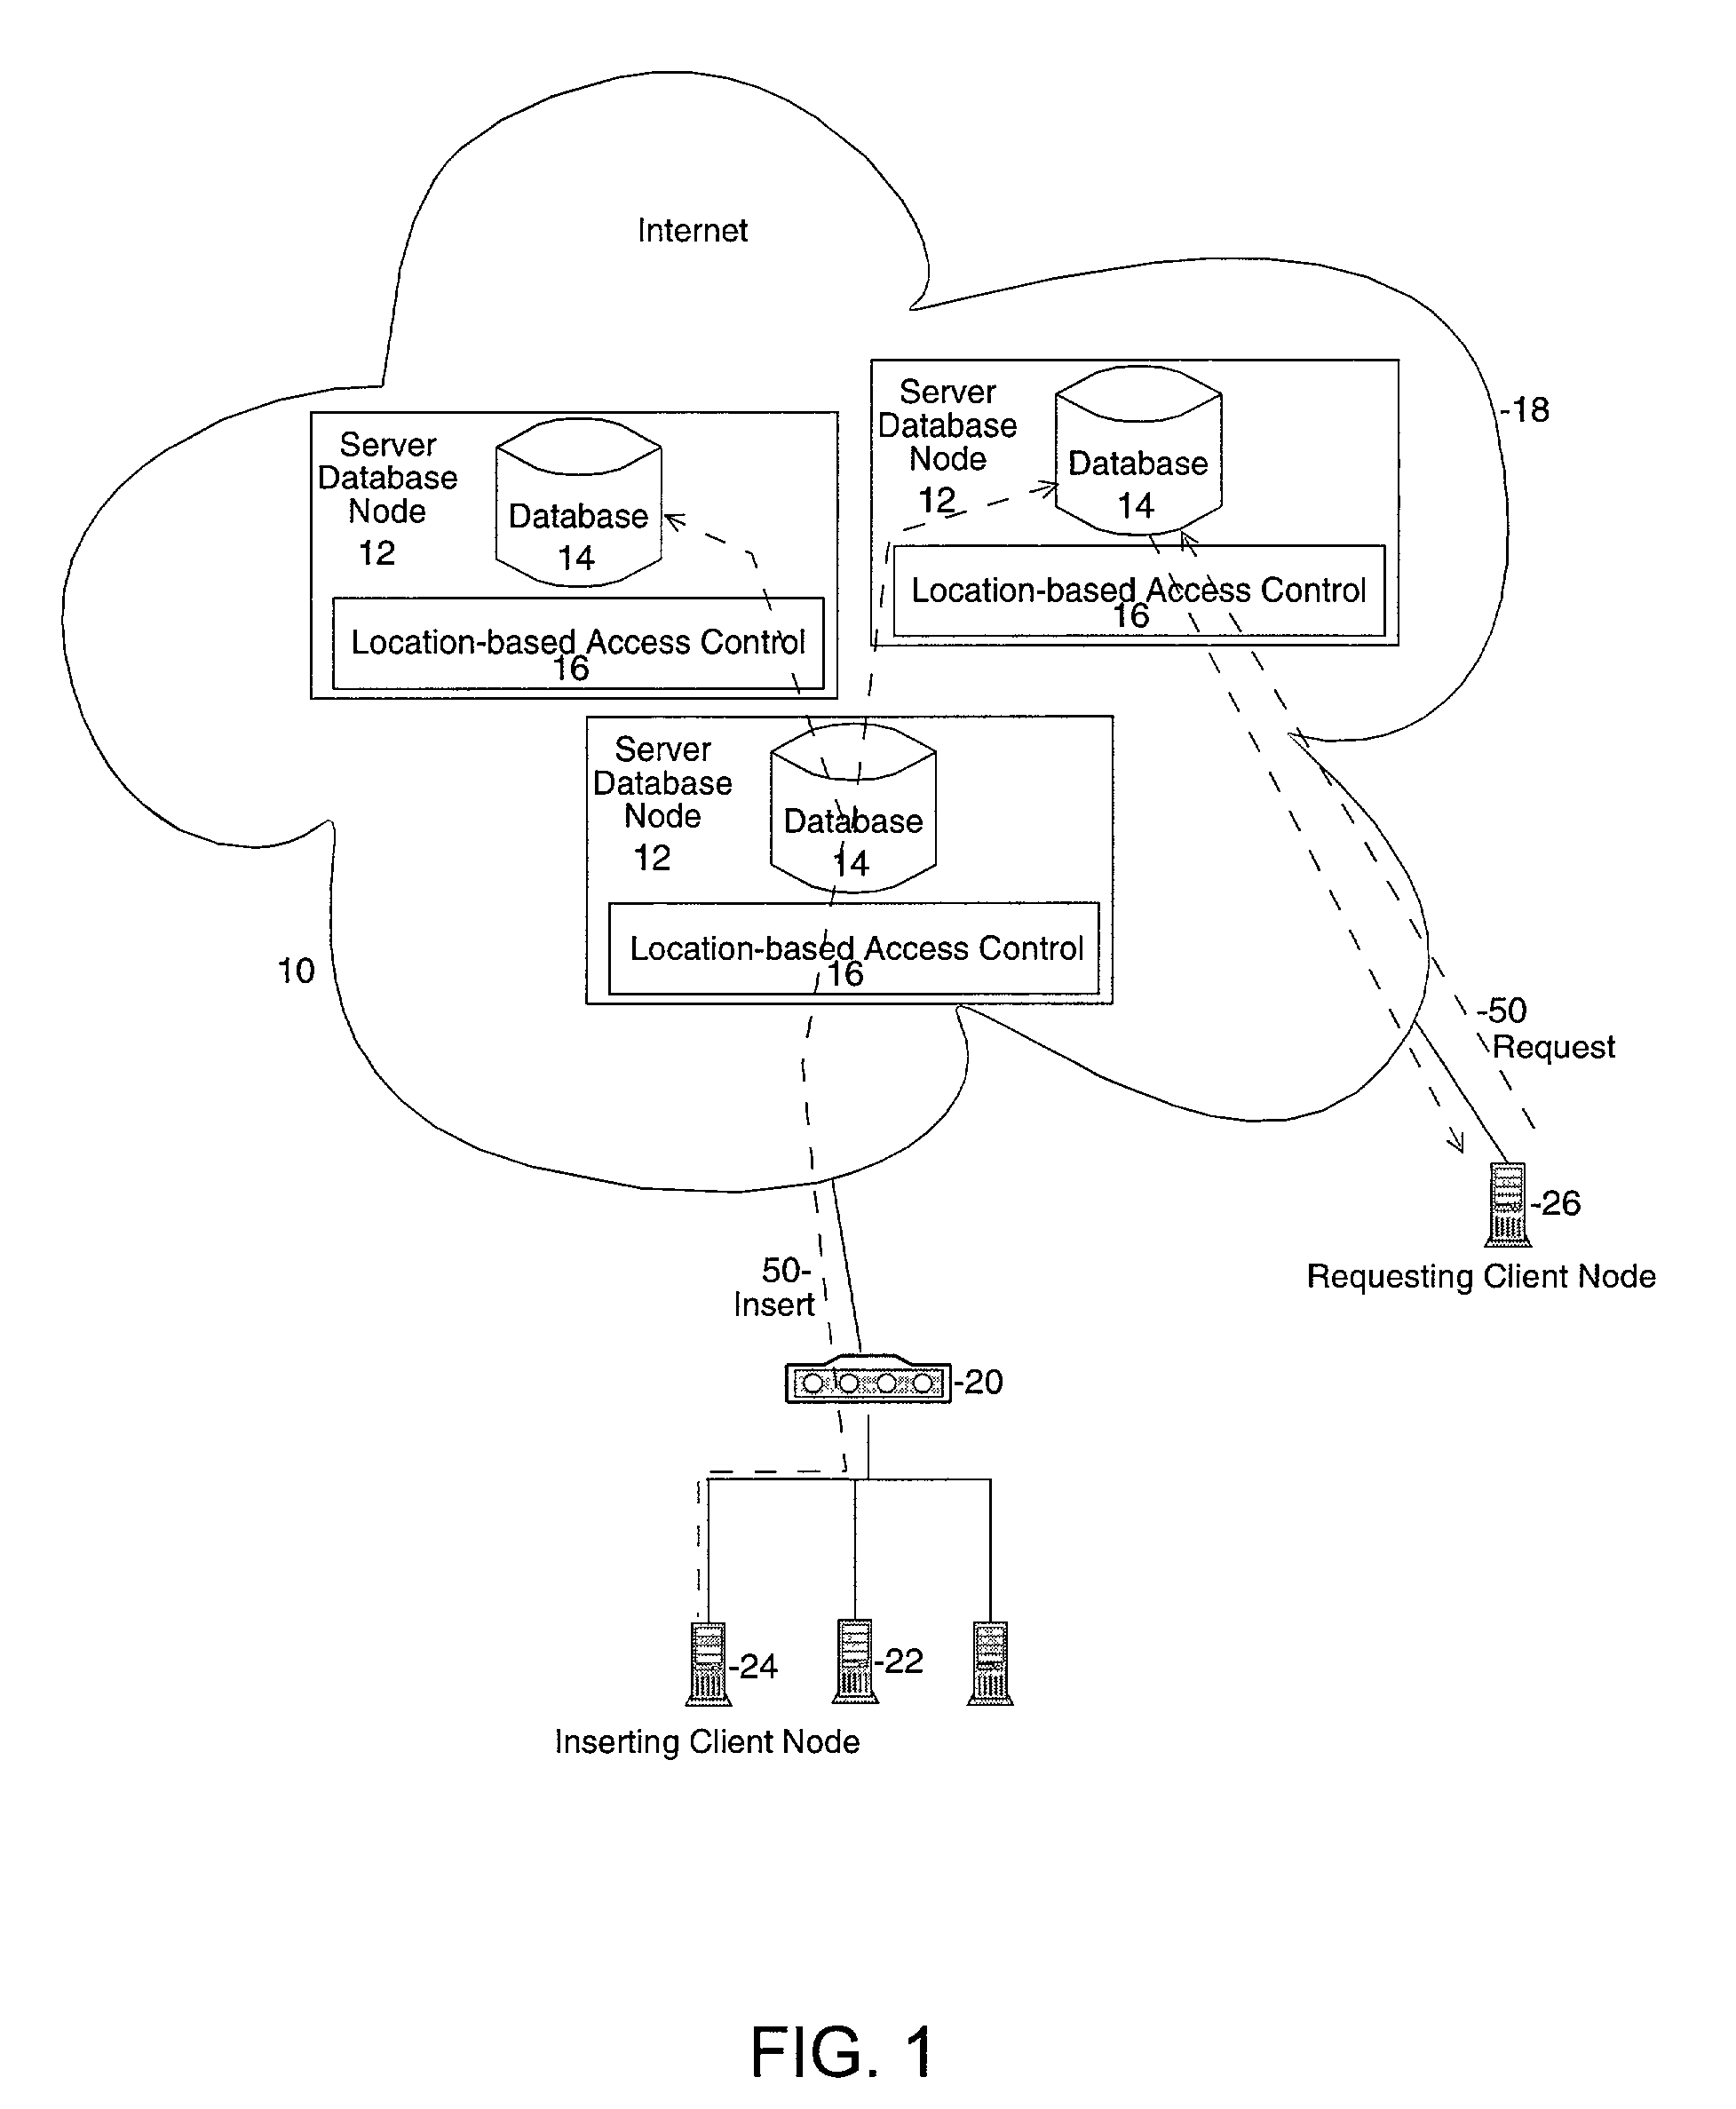 Method and system for asynchronous transmission, backup, distribution of data and file sharing